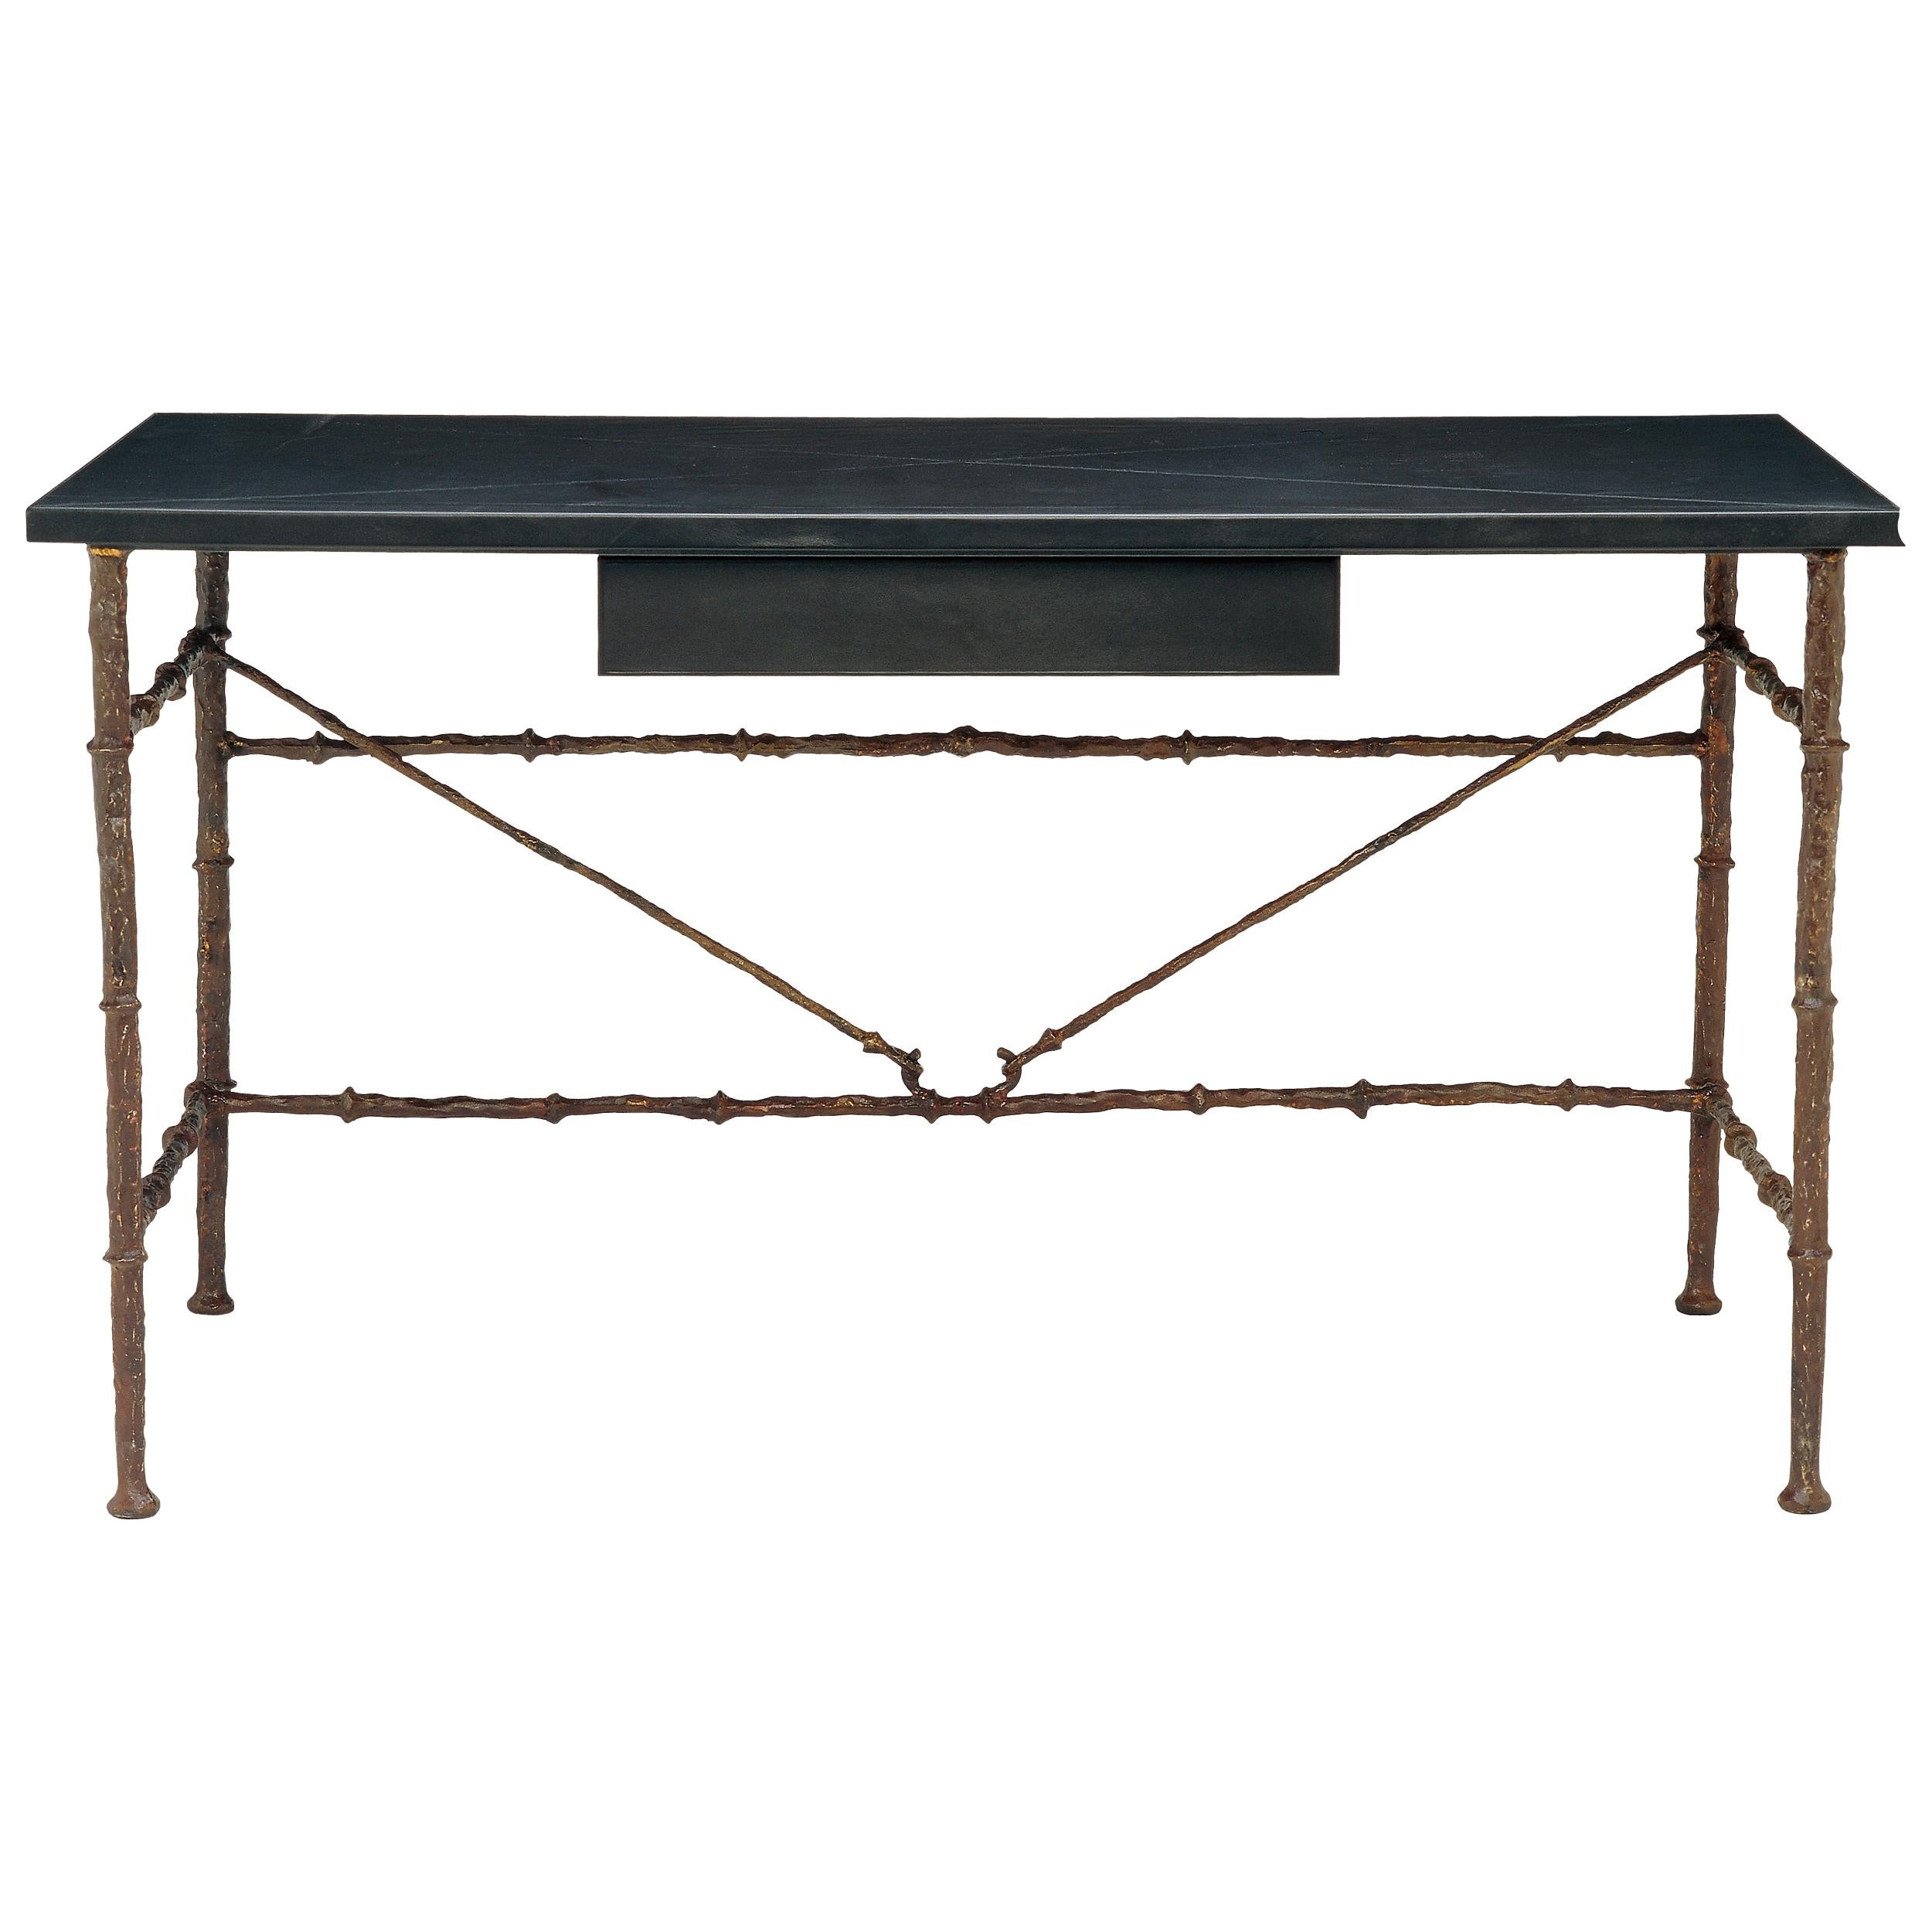 Bronze Desk with Black or Brown Leather Wrapped Top